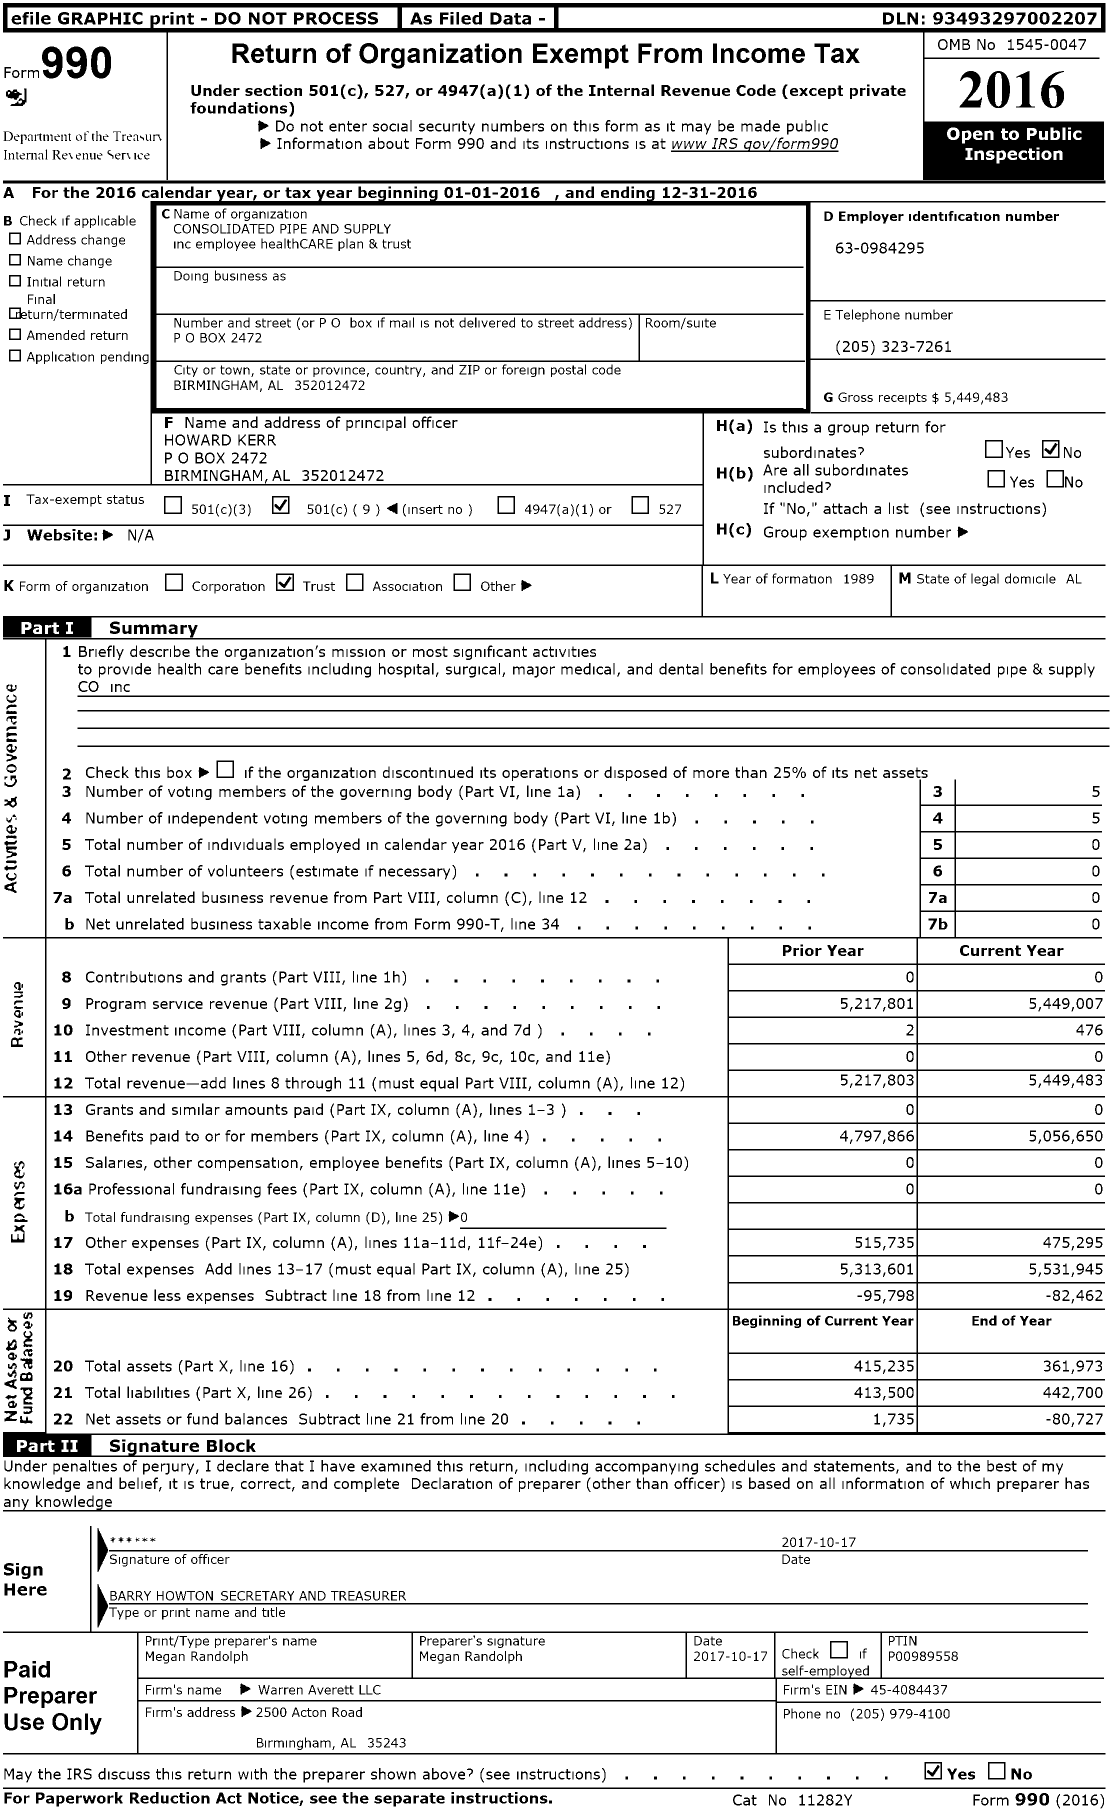 Image of first page of 2016 Form 990O for CONSOLIDATED PIPE AND SUPPLY employee healthCARE plan AND trust